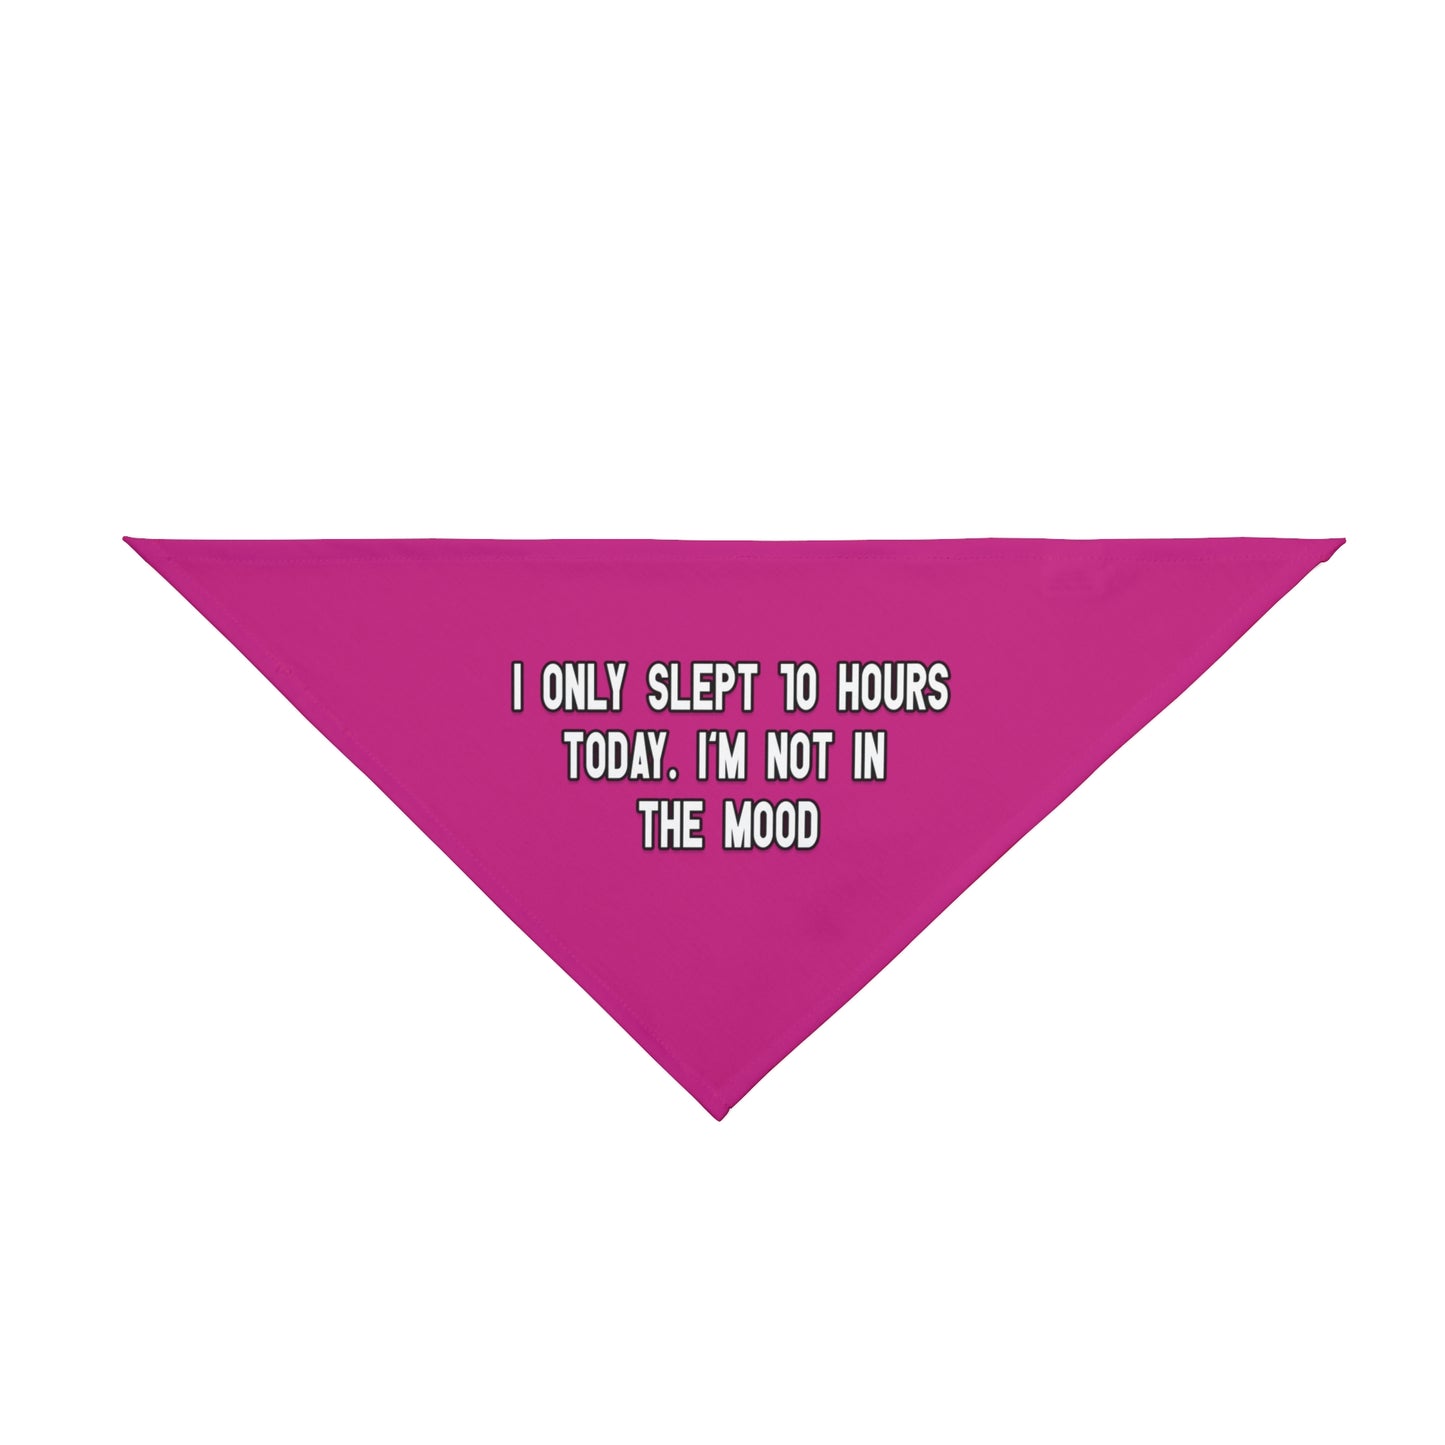 A bandana with the message: I ONLY SLEPT 10 HOURS TODAY. I'M NOT IN THE MOOD . Bandana's Color is pink